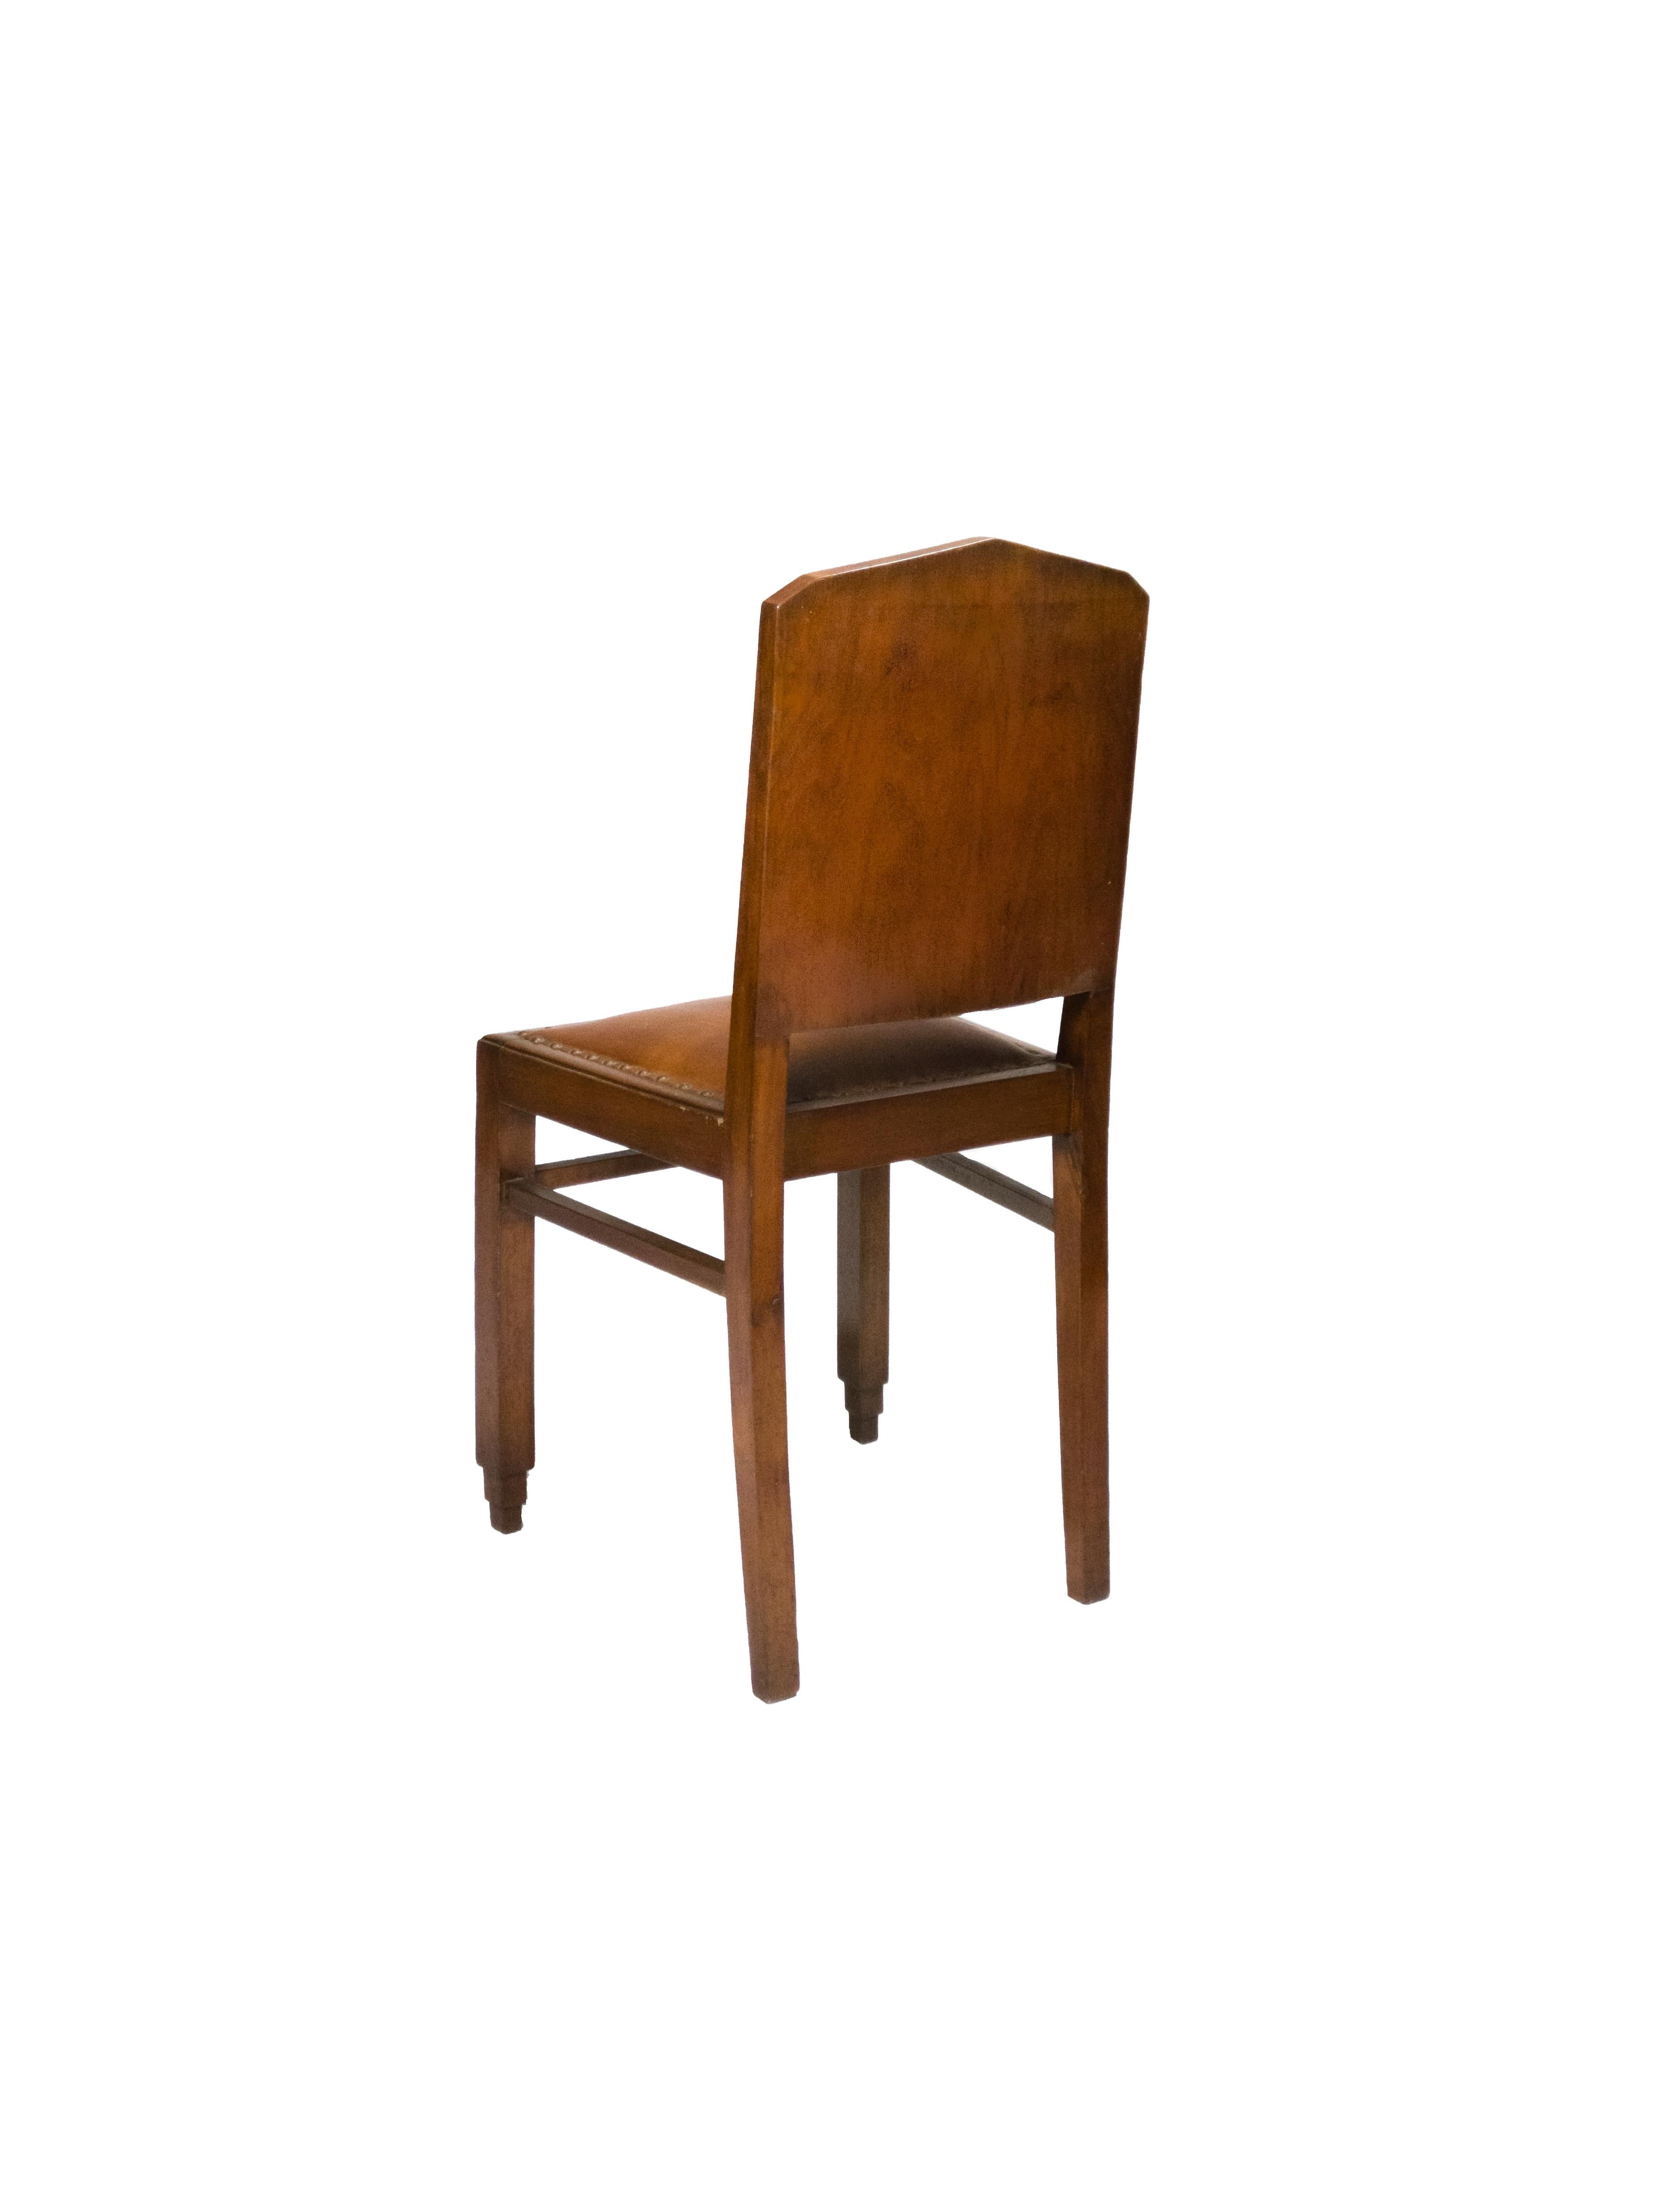 Set of 4 Art Deco Walnut Chairs  20th Century In Good Condition For Sale In Lisbon, PT